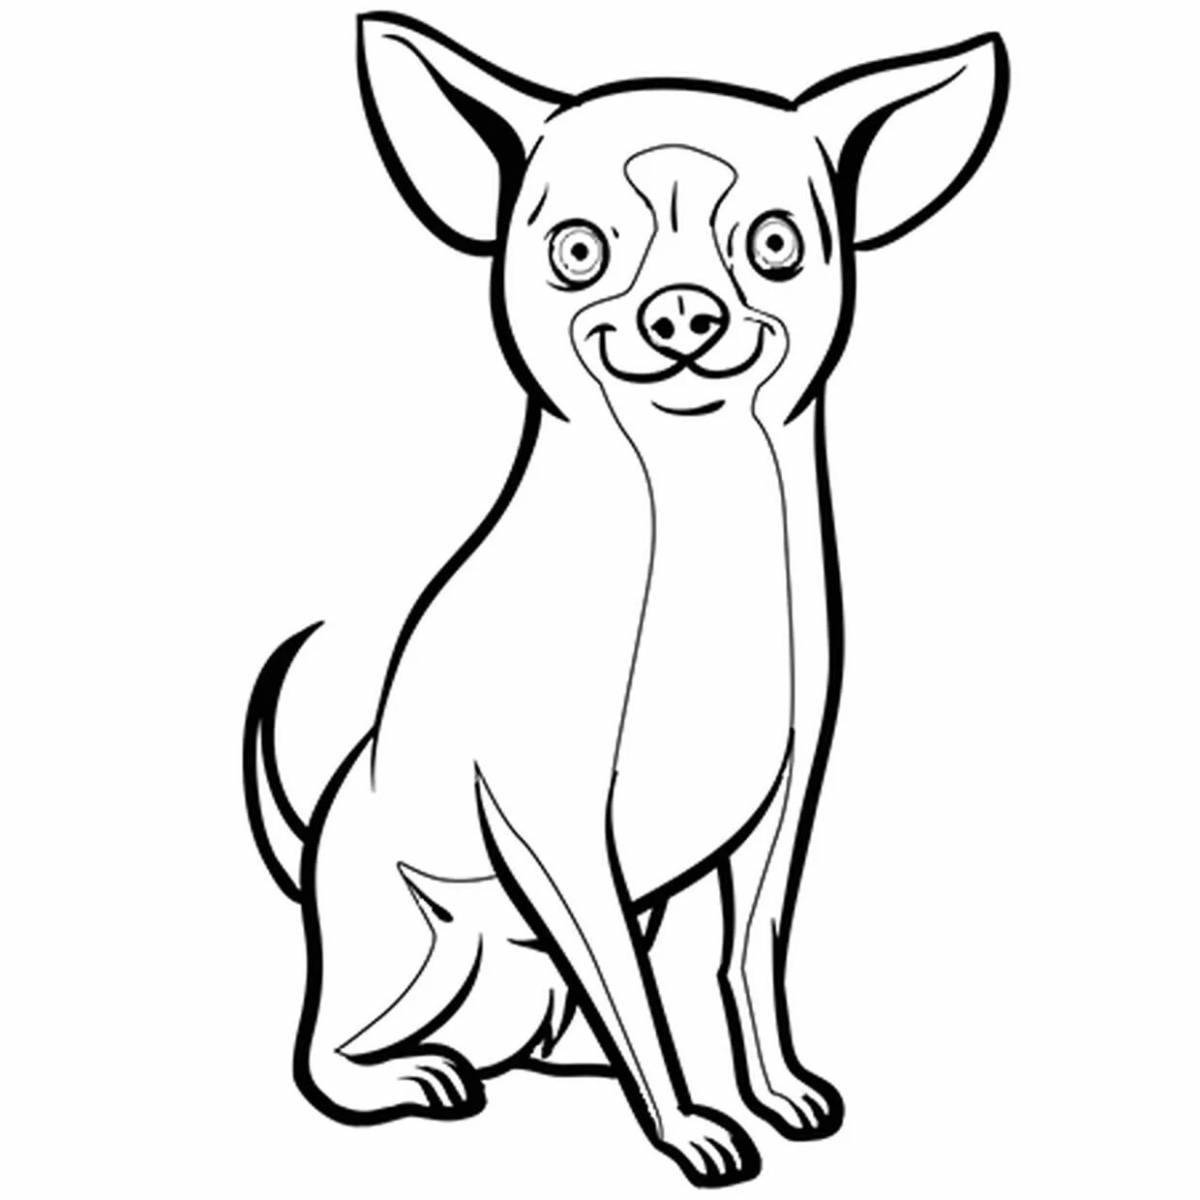 Colorful chihuahua dog coloring page